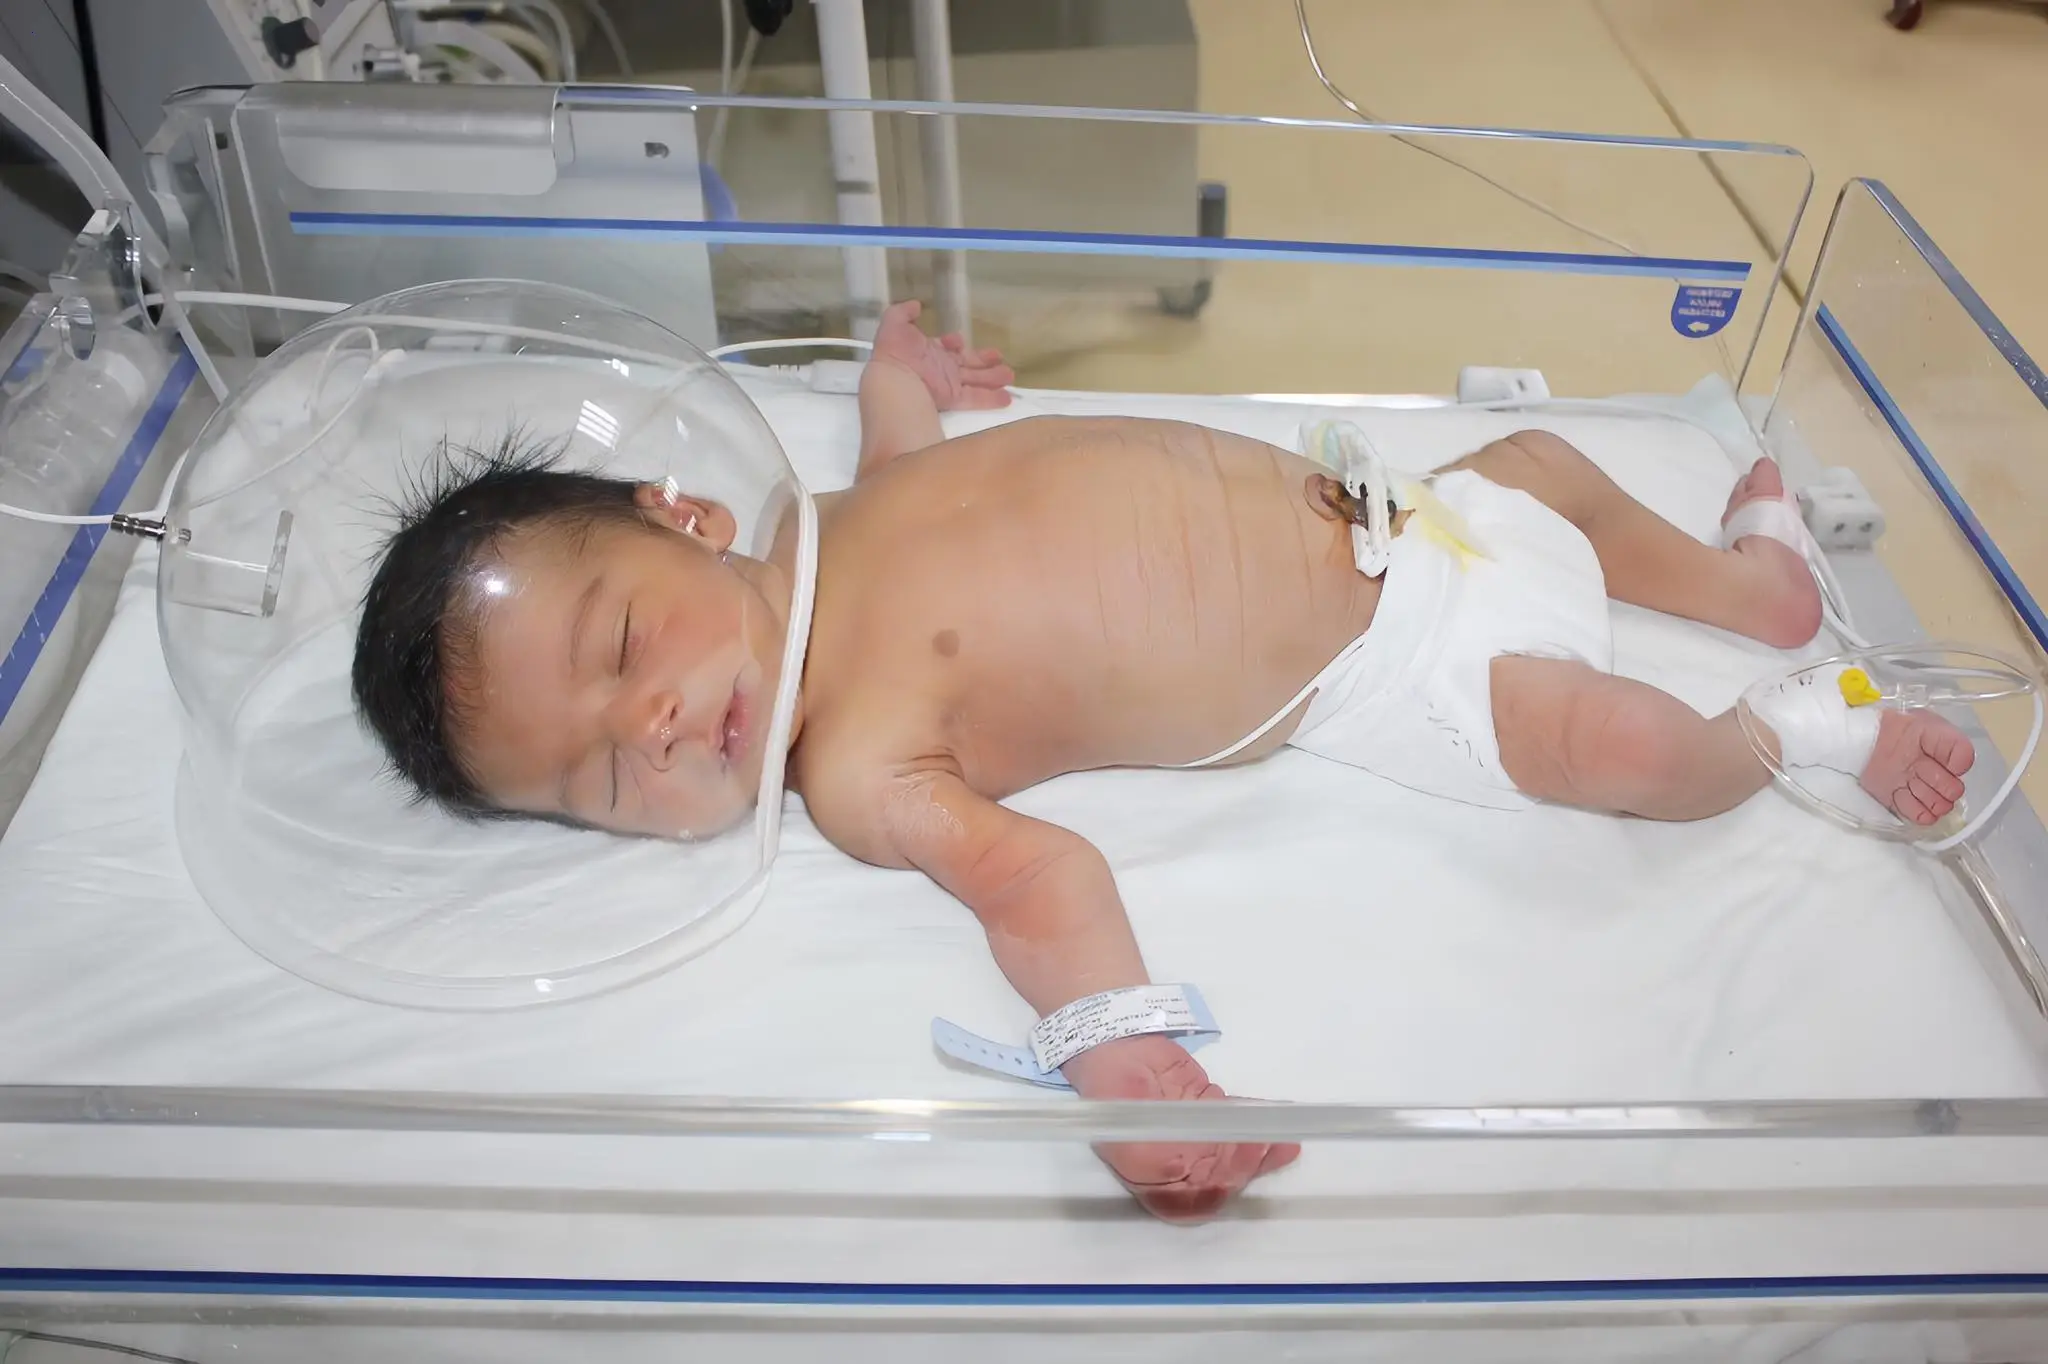 Triumph over adversity: The inspirational journey of strength of a three-legged infant